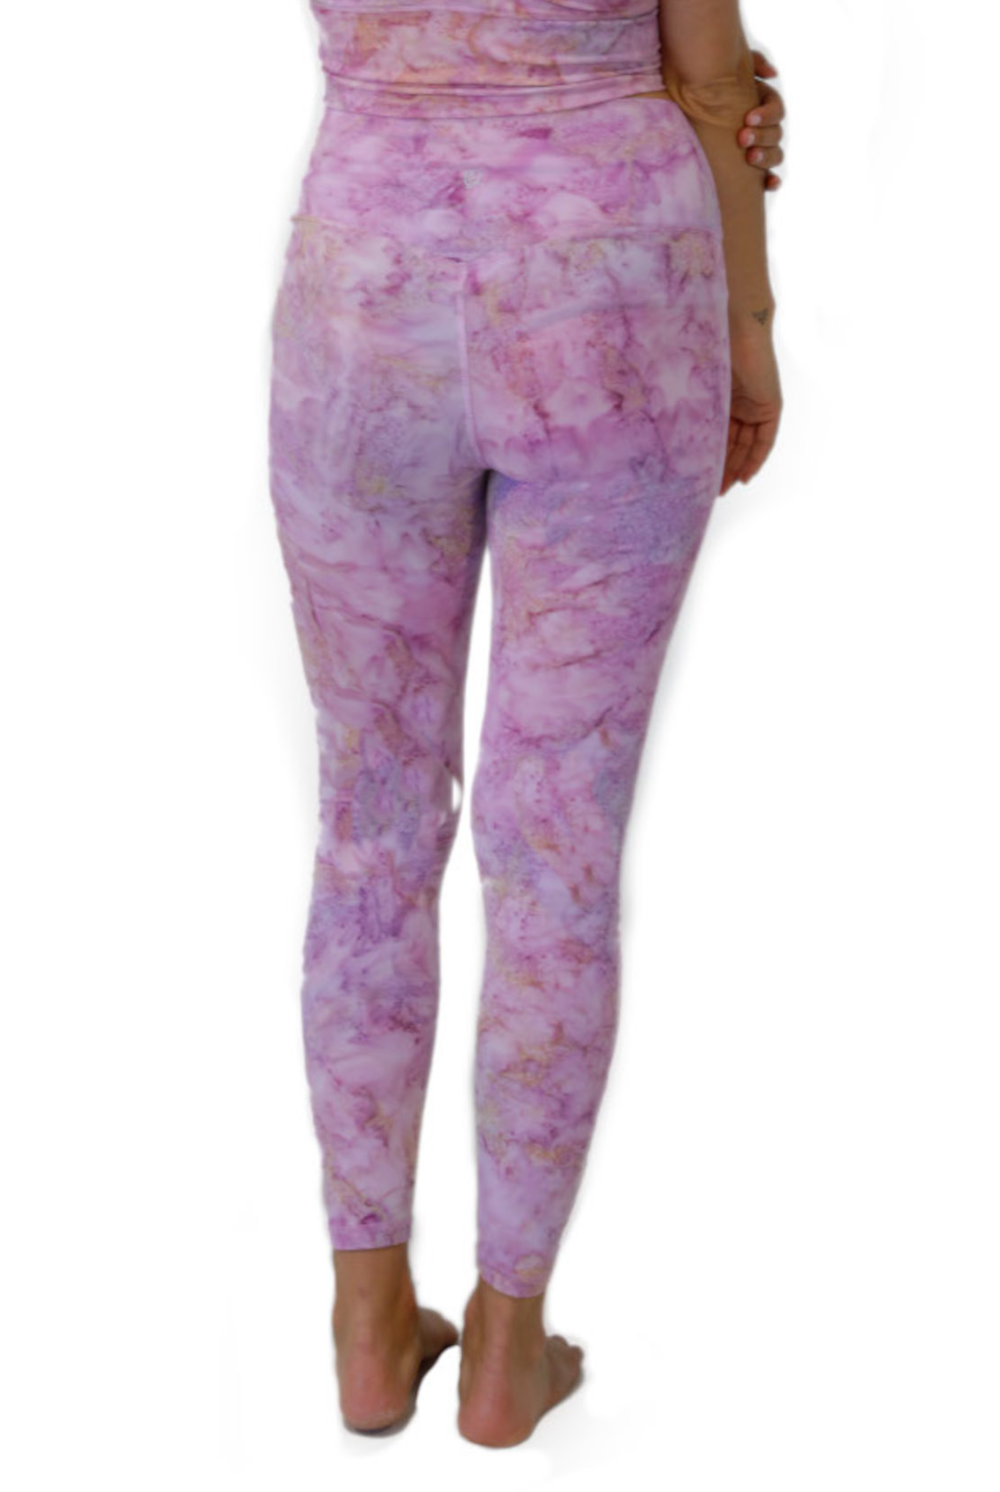 Leggings - Bali Chill Out